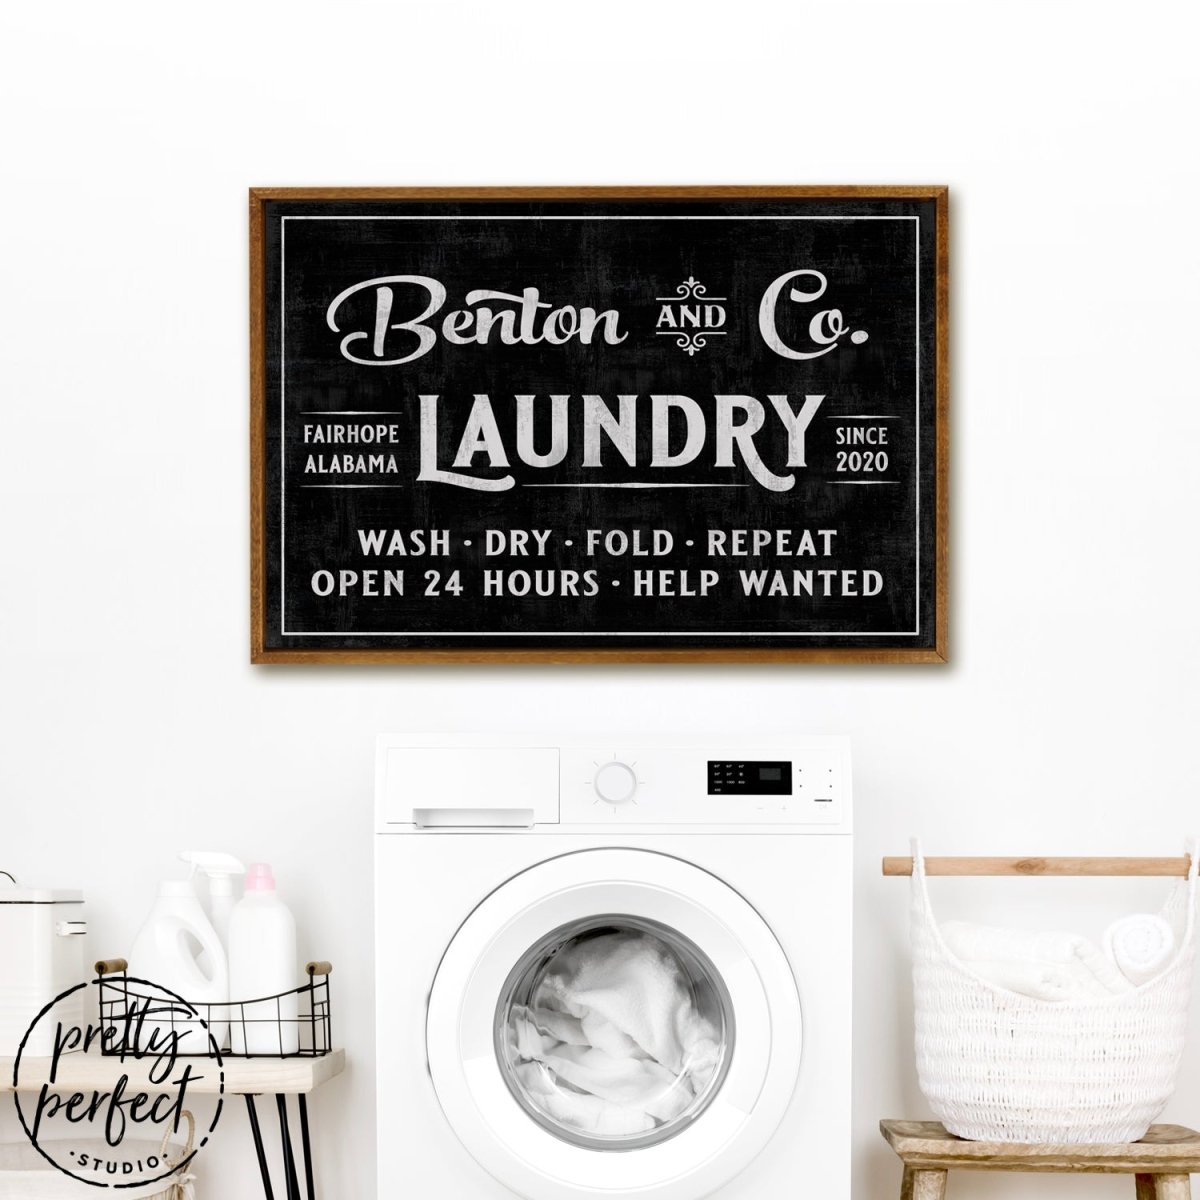 Custom Wash, Dry, Fold and Repeat Laundry Sign Hanging Above Washer in Laundry Room – Pretty Perfect Studio